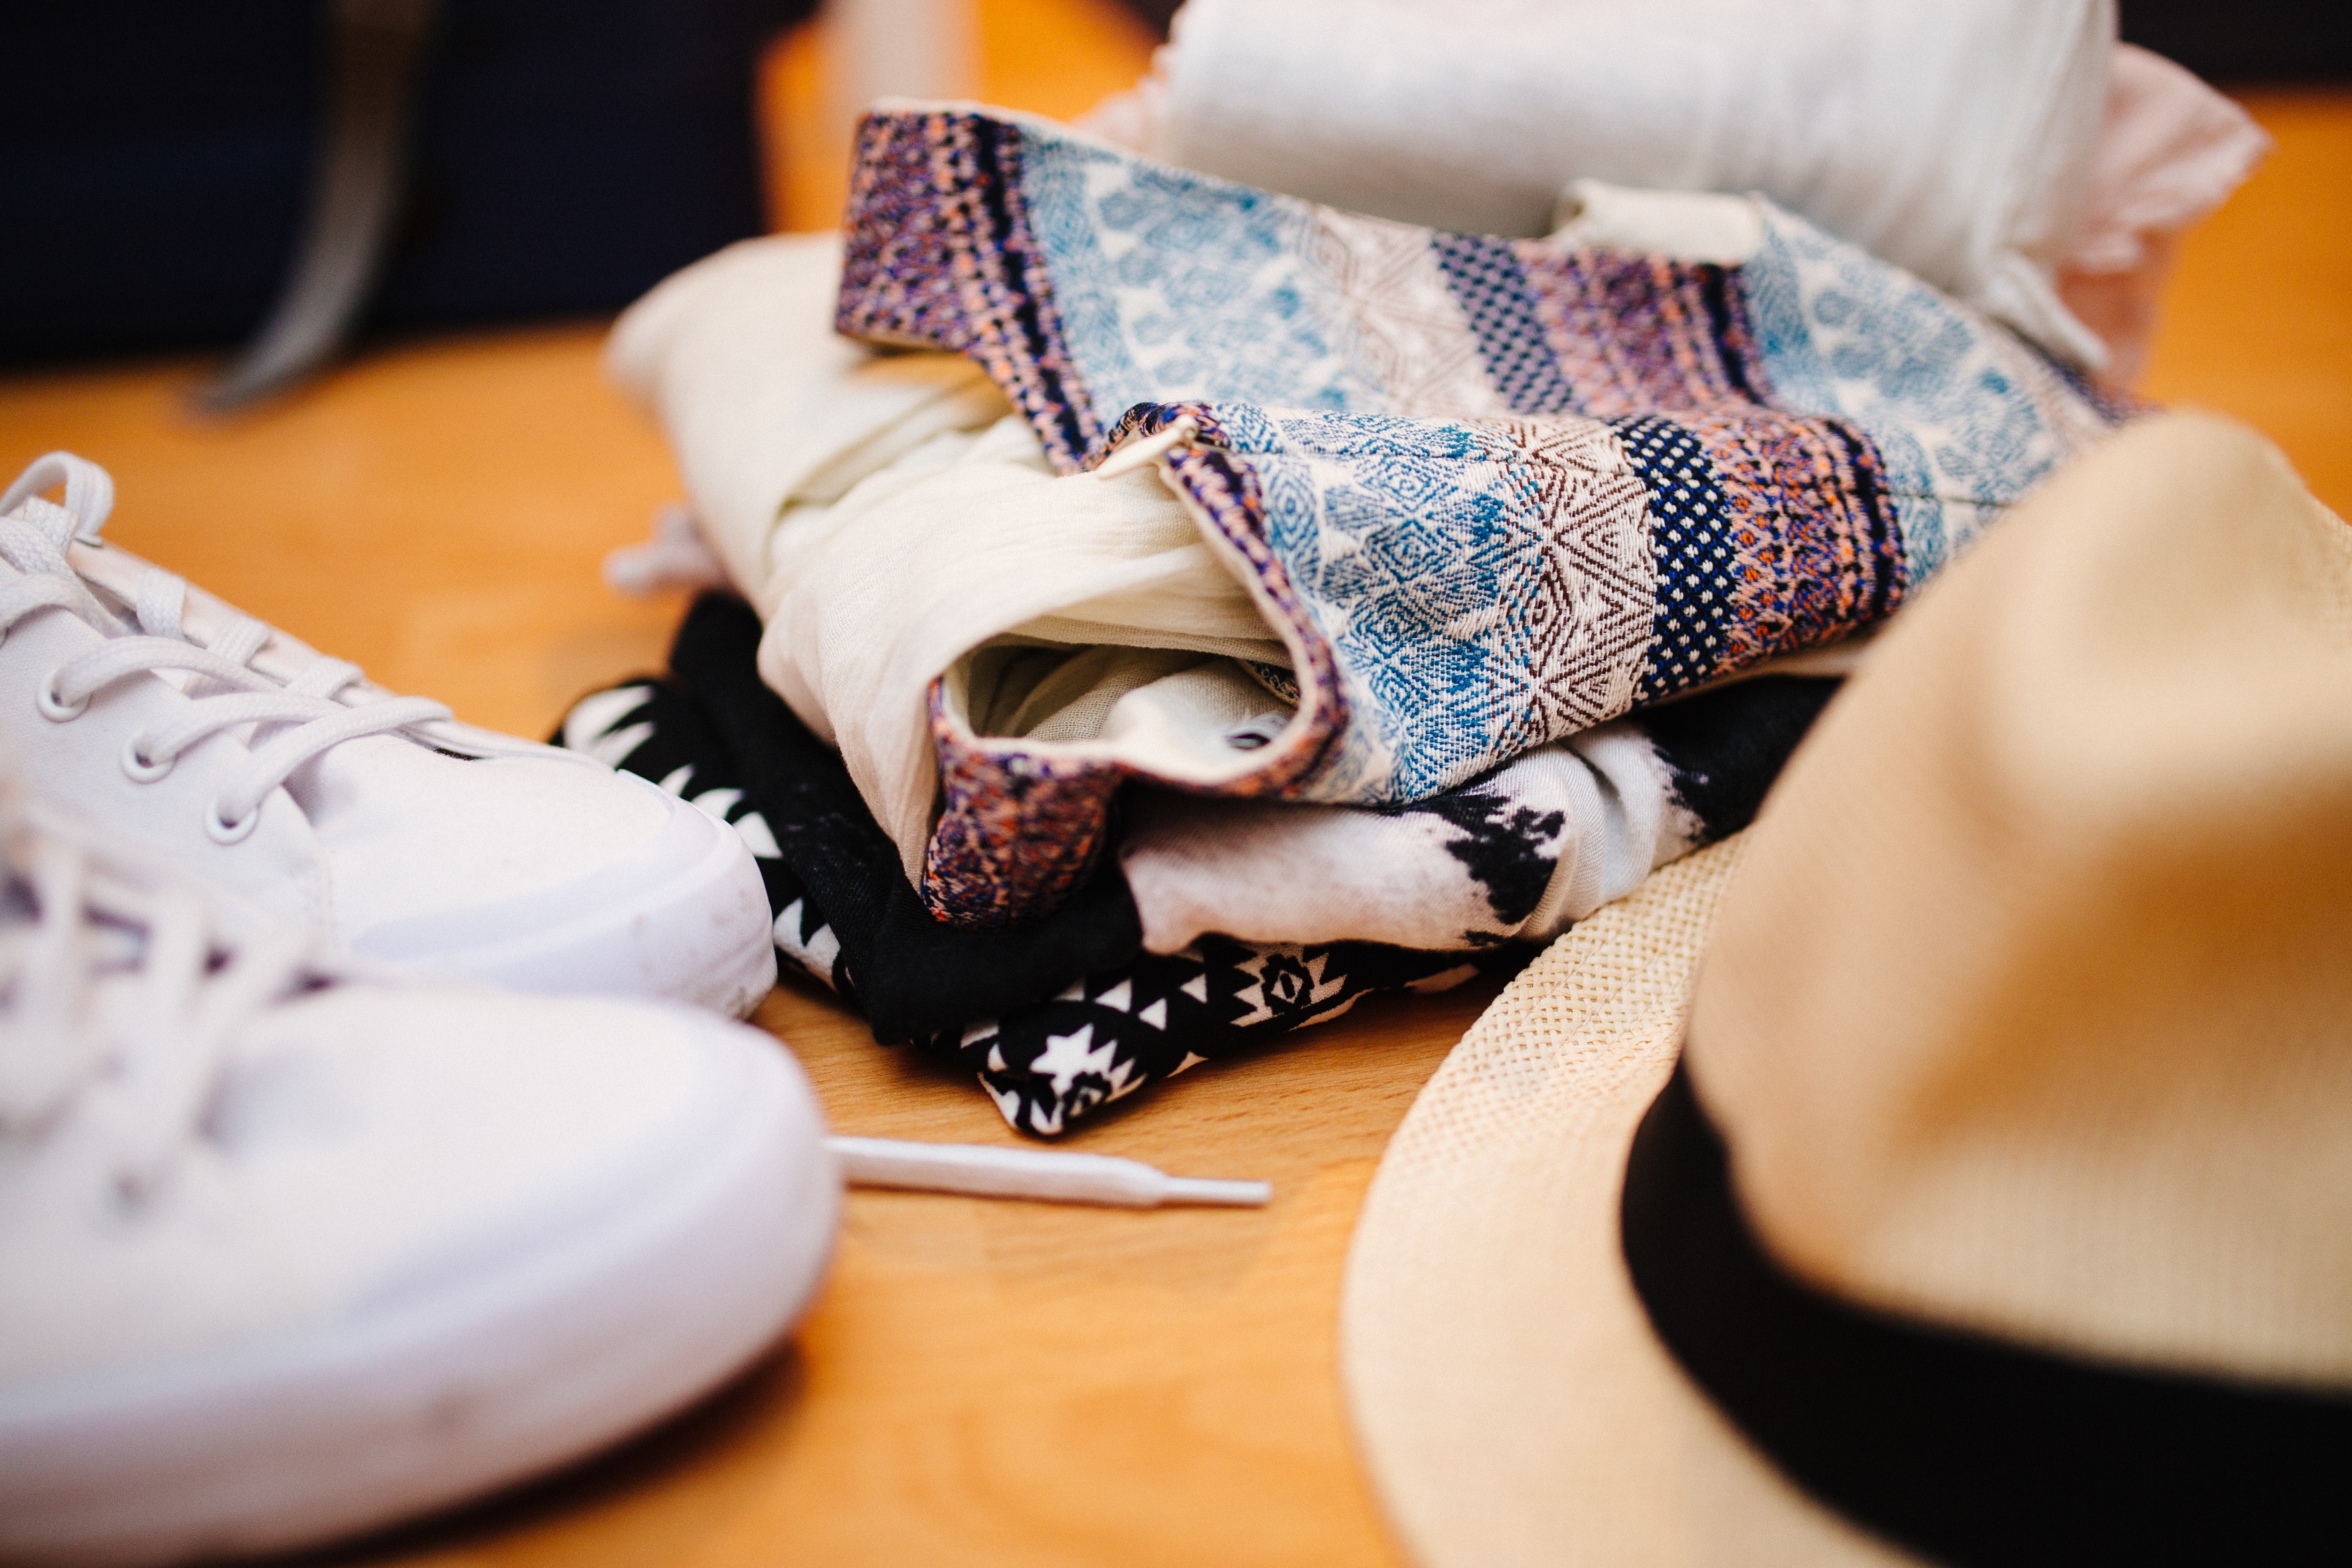 Packing tips for your next girls weekend getaway